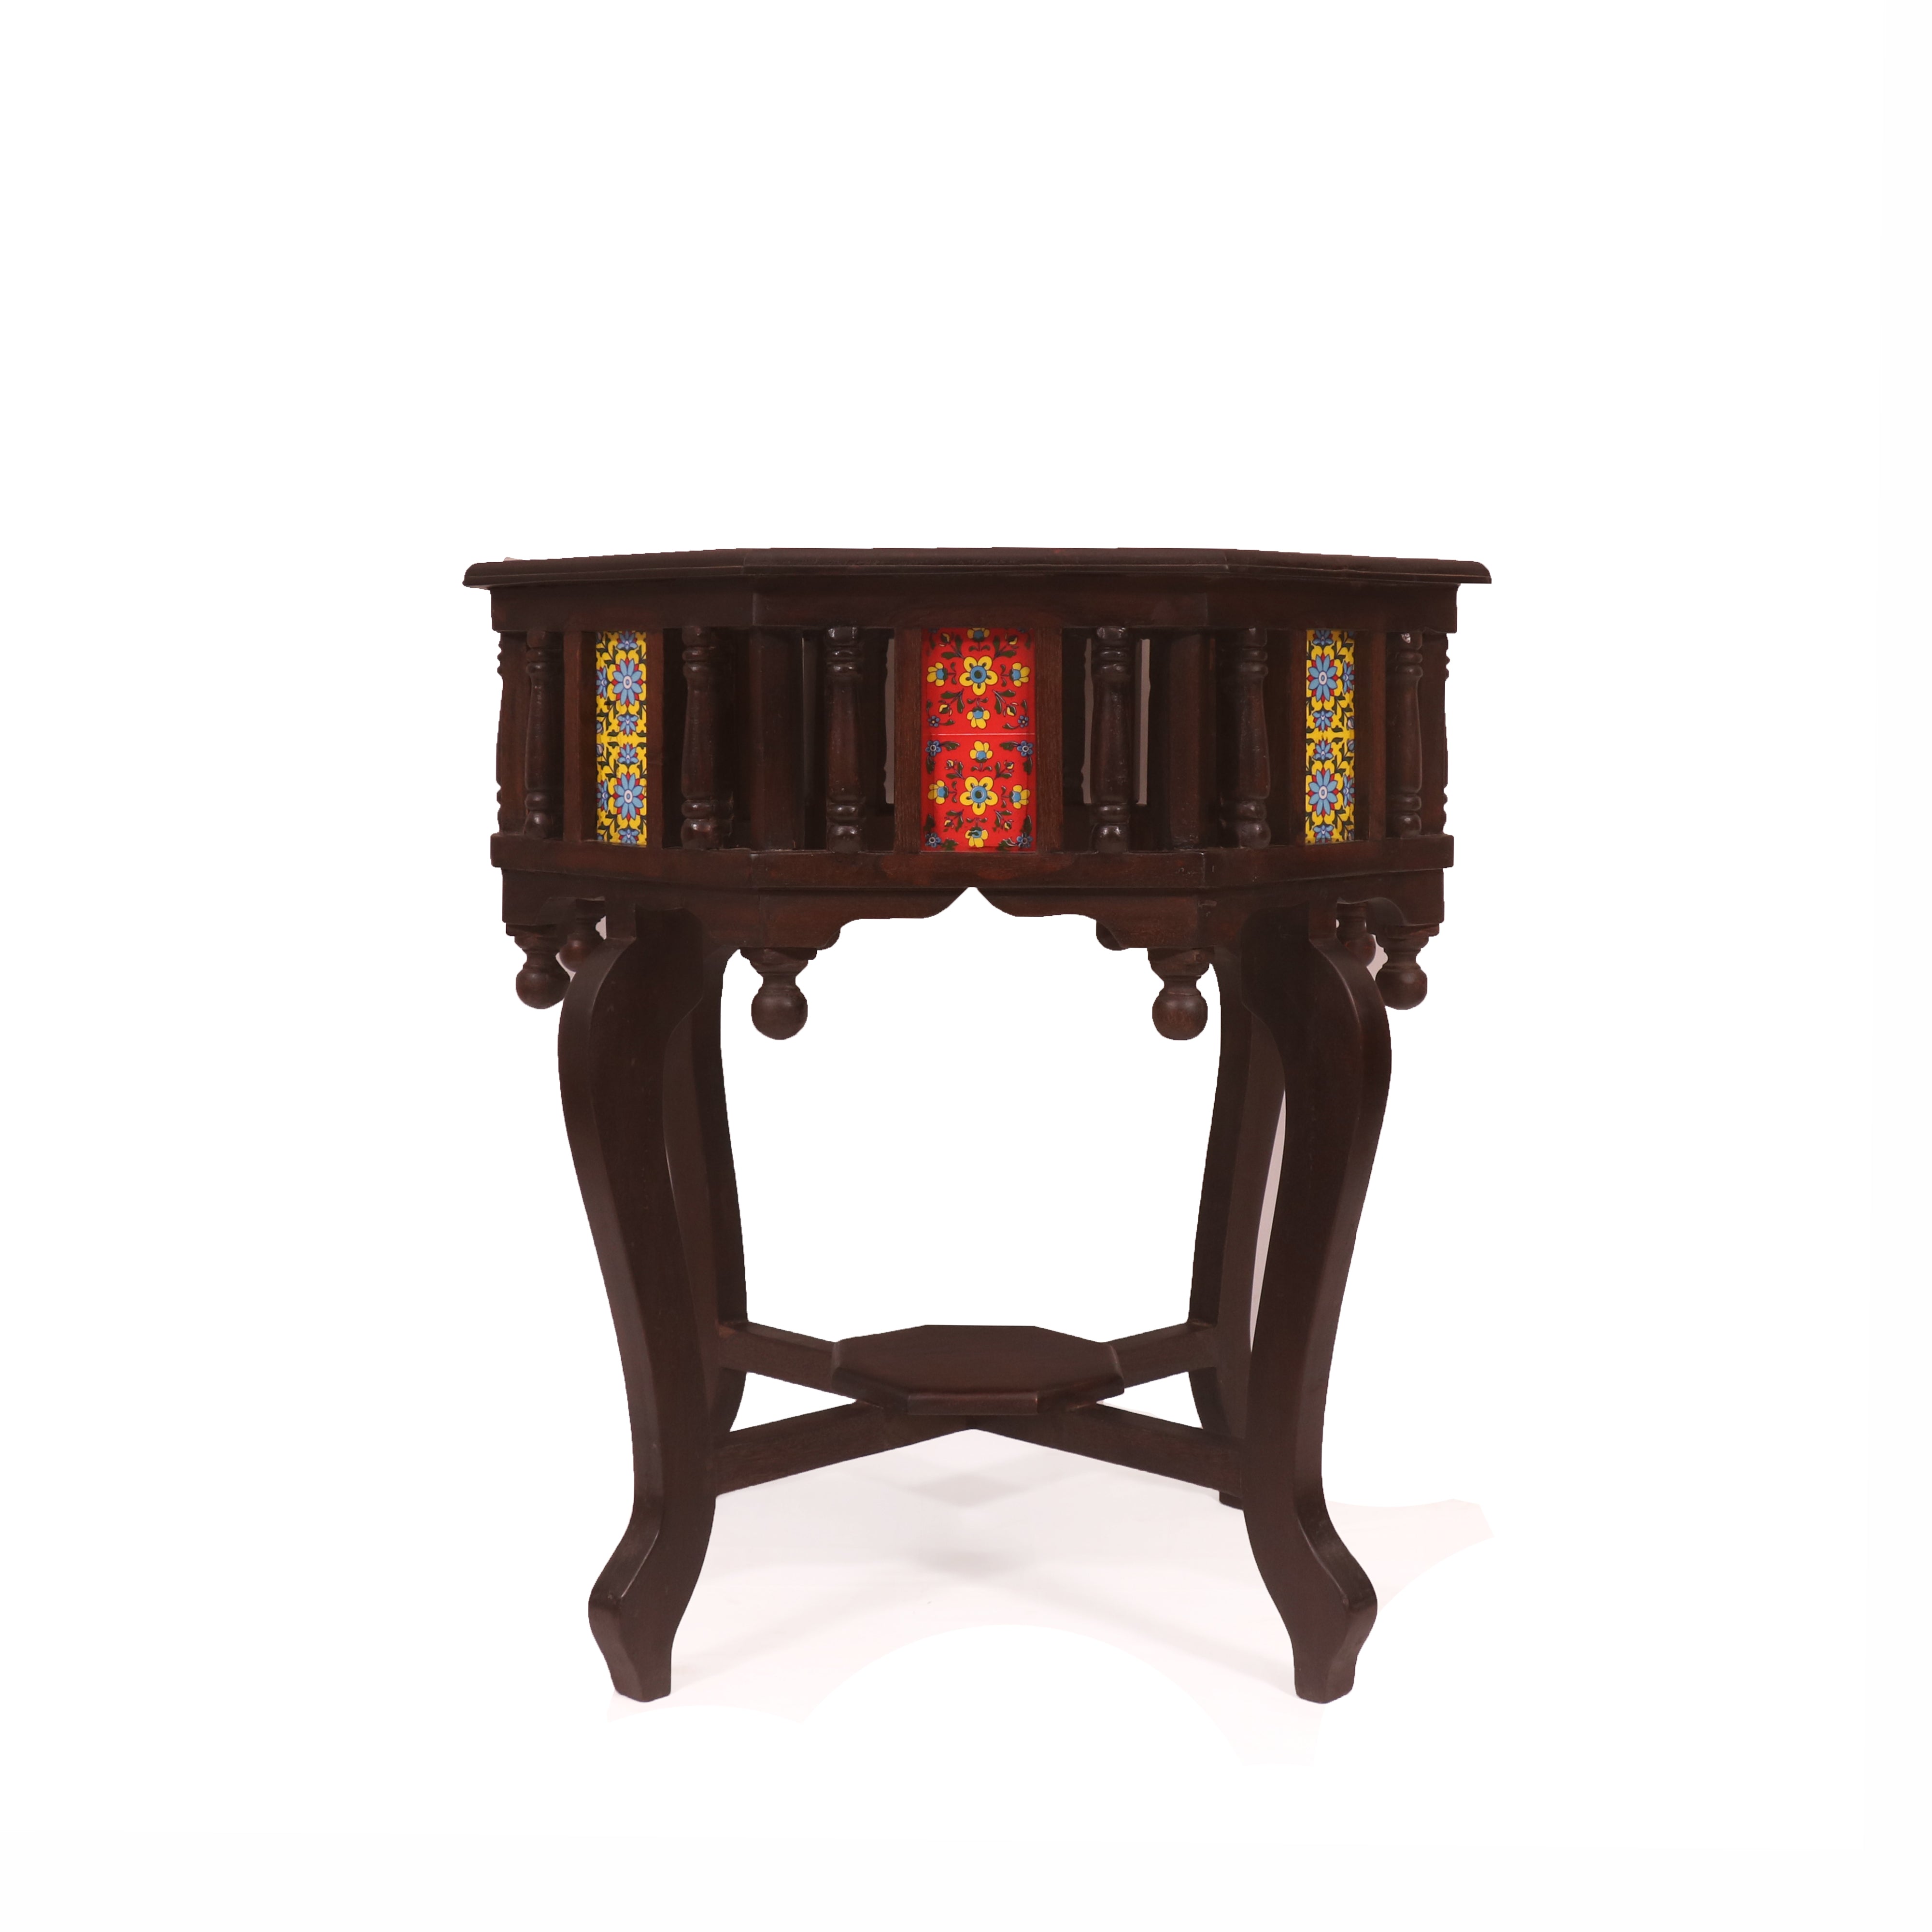 Colonial Style Octagonal Table End Table